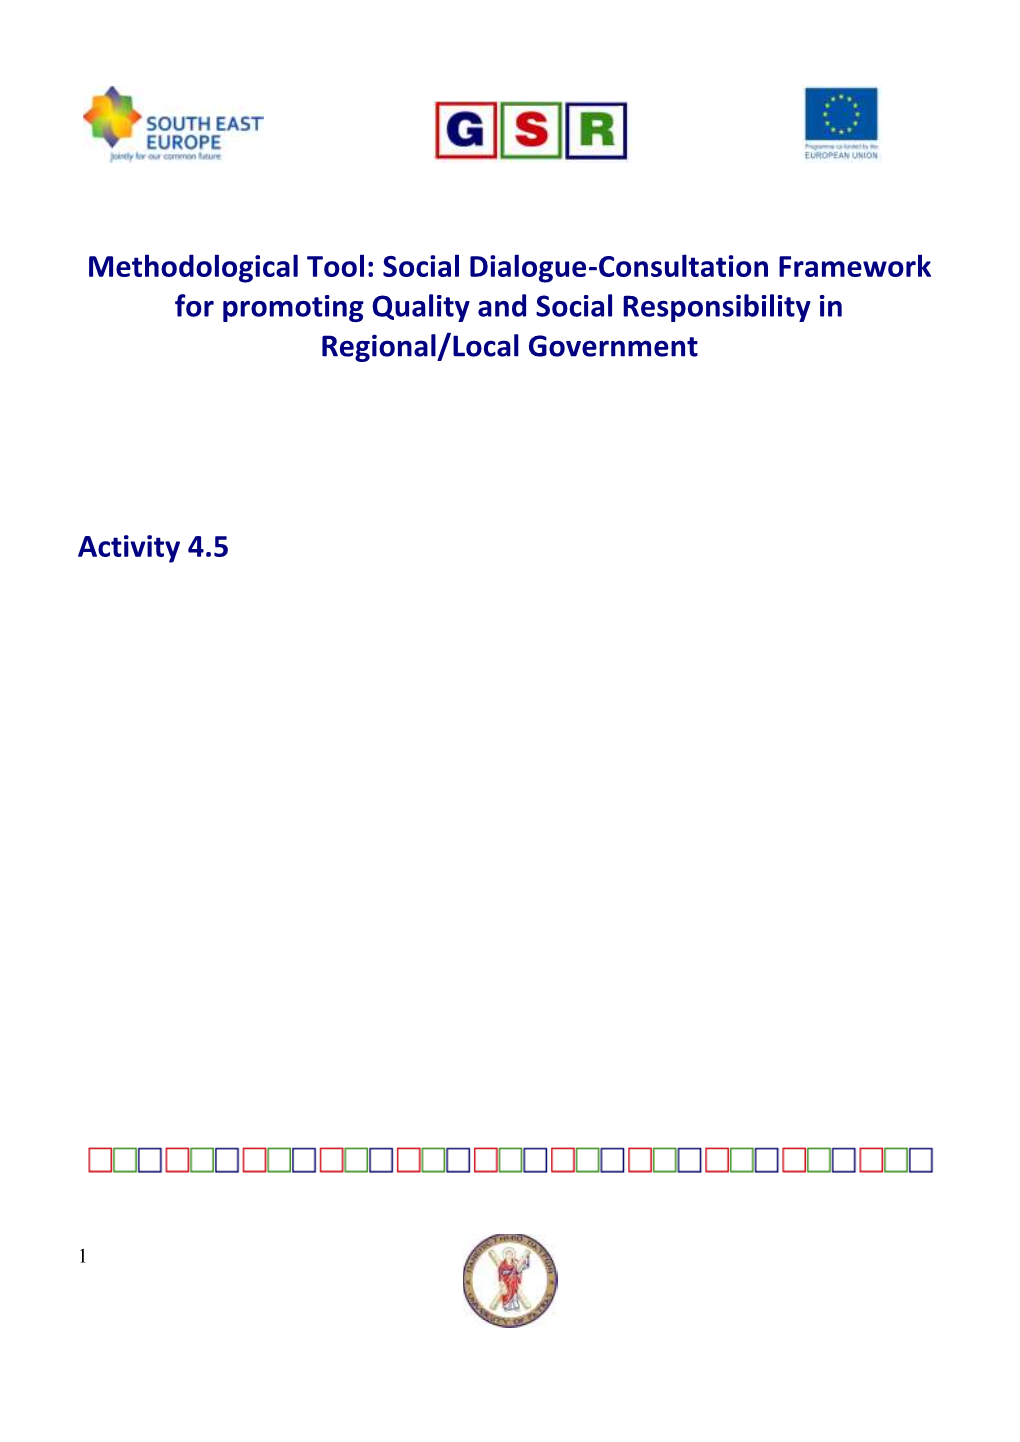 Social Dialogue-Consultation Framework for Promoting Quality and Social Responsibility in Regional/Local Government